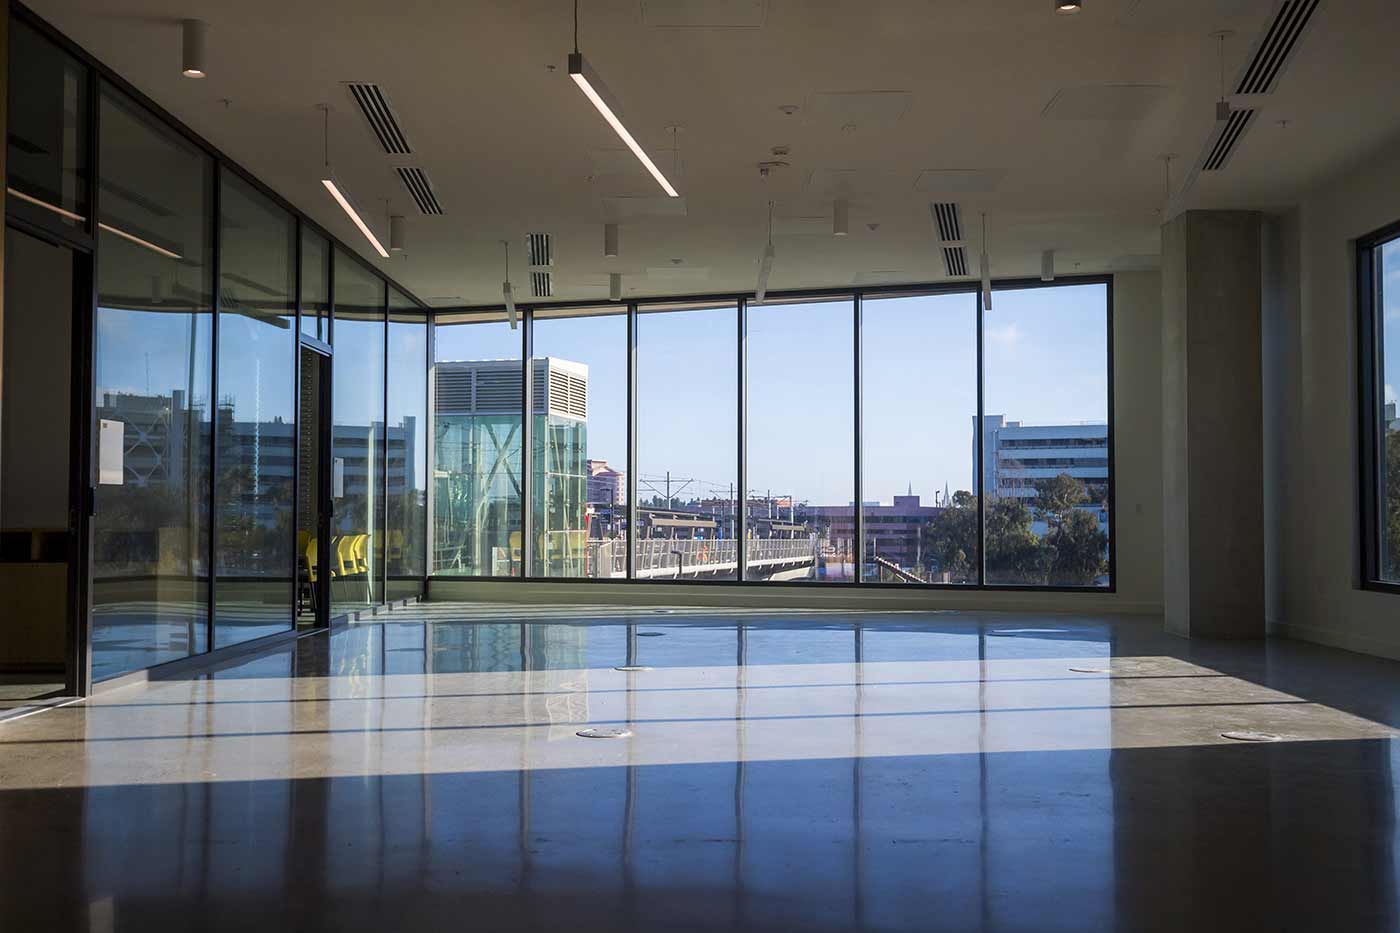 Third floor of the Design and Innovation Building.